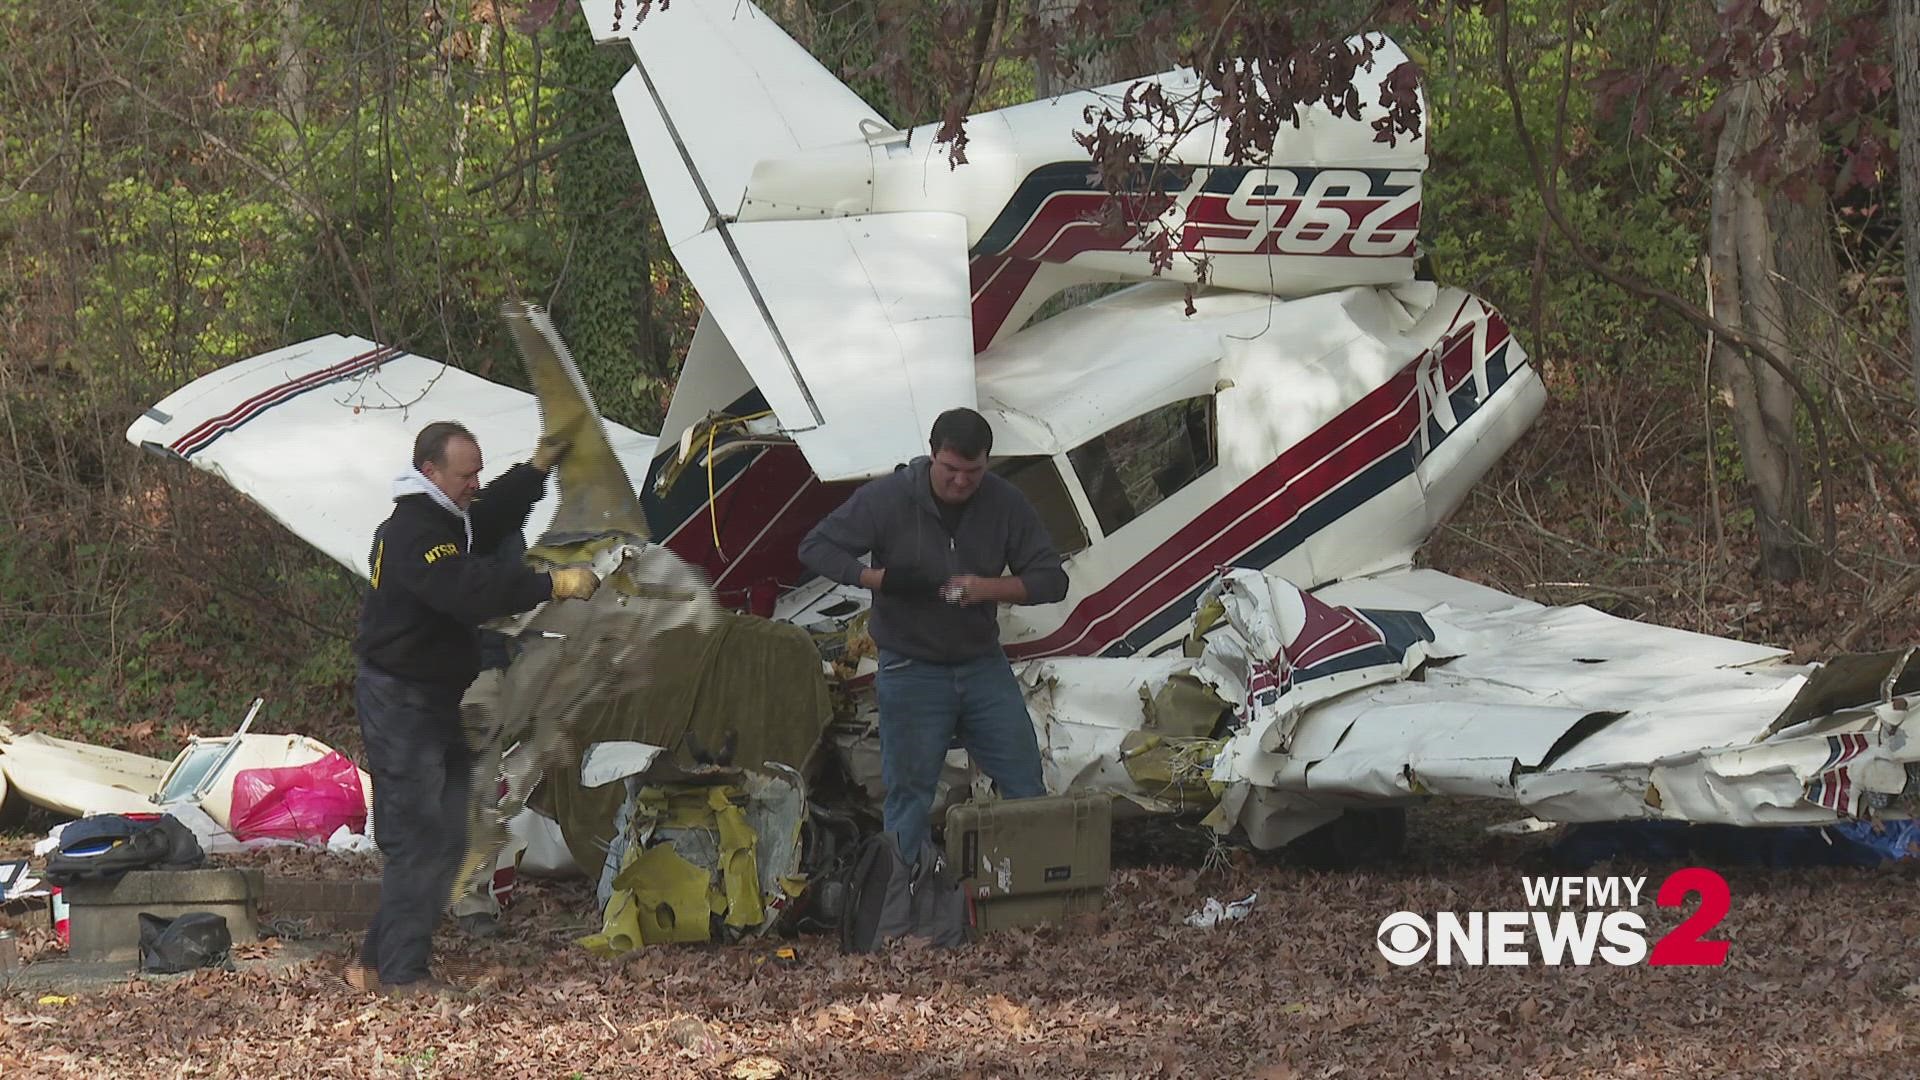 A National Transportation Safety Board official confirmed two people are dead after a plane crashed on New Walkertown Road in Winston-Salem Saturday.